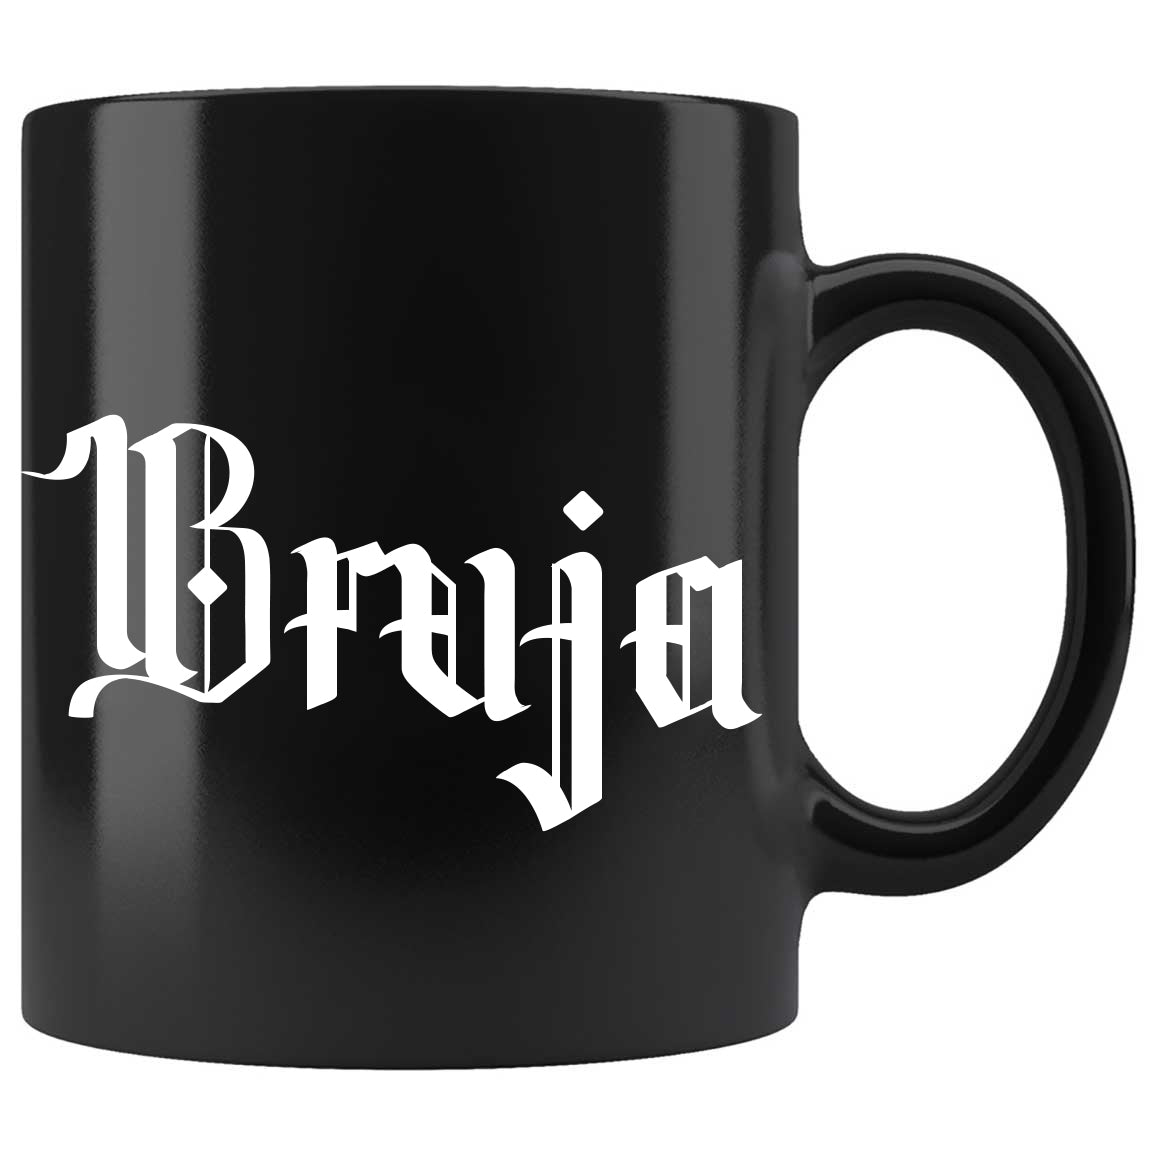 Skitongifts Funny Ceramic Coffee Mug For Birthday, Mother's Day, Father's Day, Christmas PN031221-Bruja